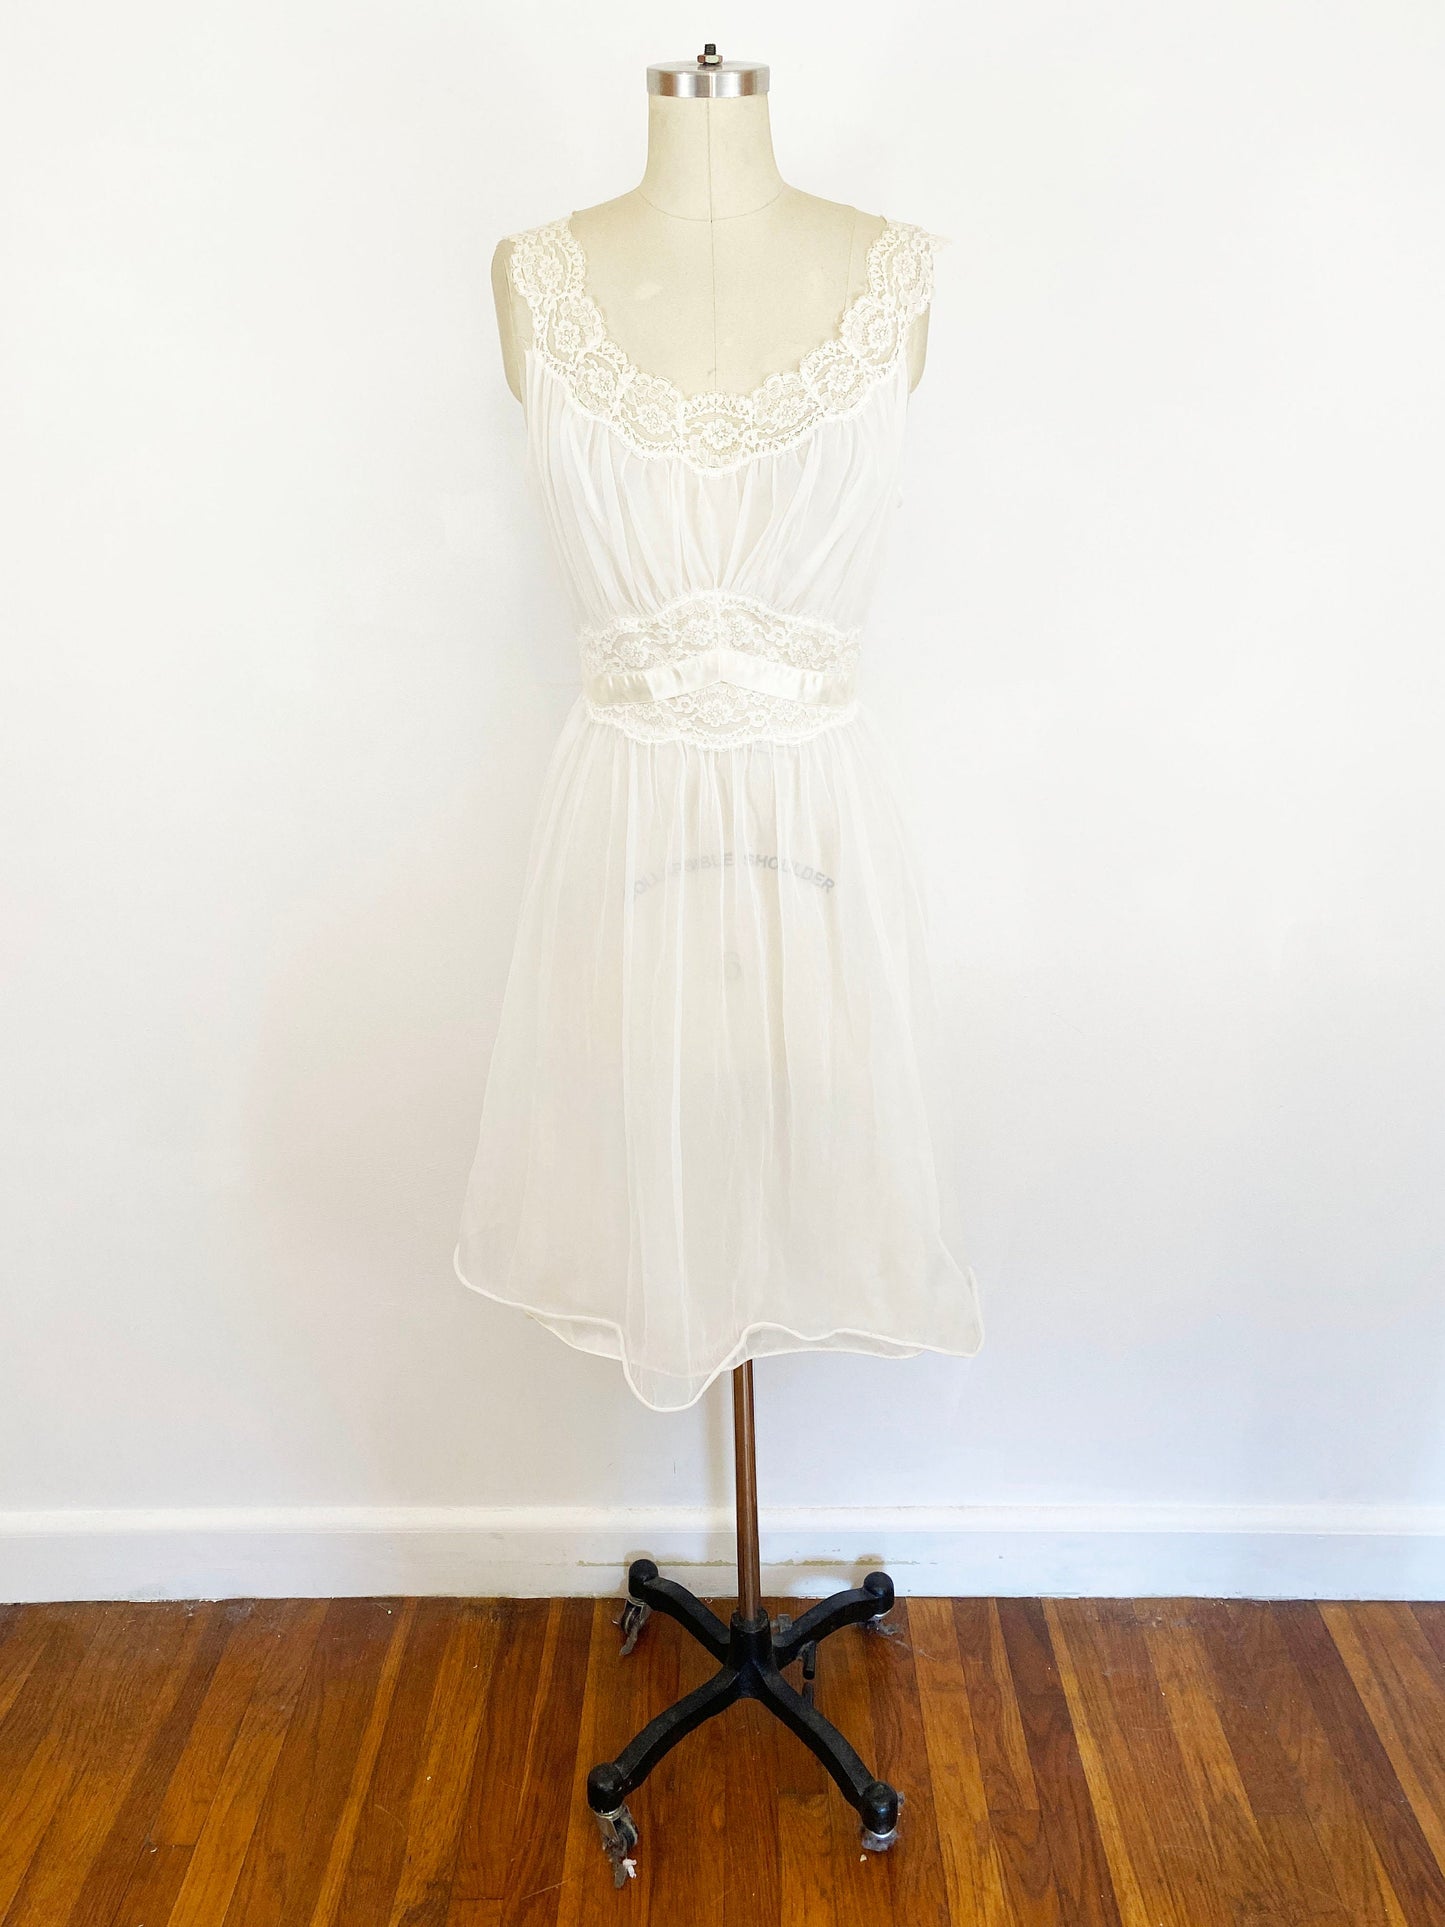 1950-1960s White Lace Sheer Nylon Peignoir Set Nightgown Naughty Nighty Pin Up Sexy Goddess Retro Fit Flare Vintage / Vanity Fair / Size Small